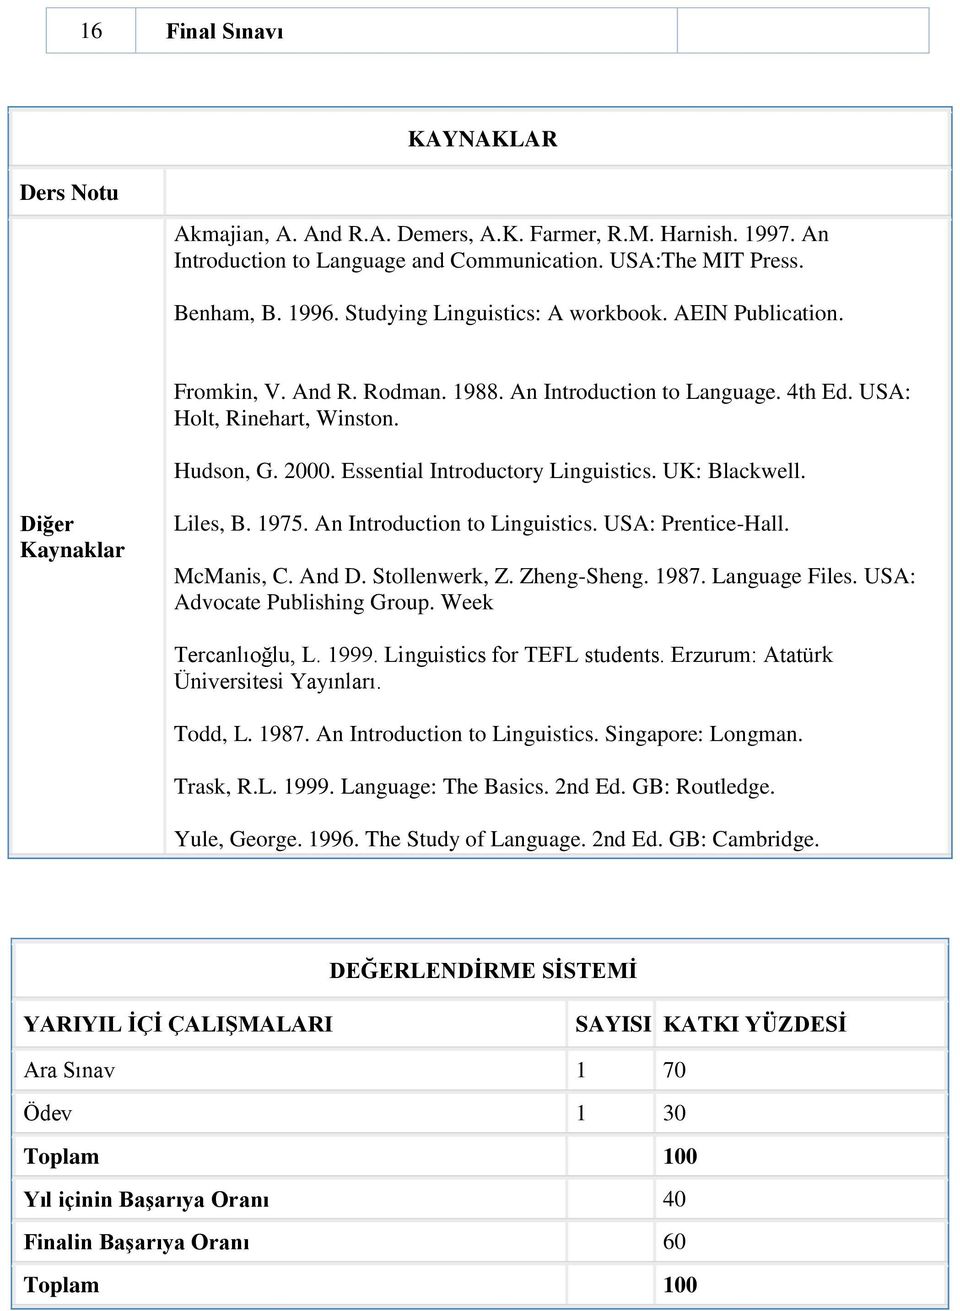 Essential Introductory Linguistics. UK: Blackwell. Diğer Kaynaklar Liles, B. 975. An Introduction to Linguistics. USA: Prentice-Hall. McManis, C. And D. Stollenwerk, Z. Zheng-Sheng. 987.